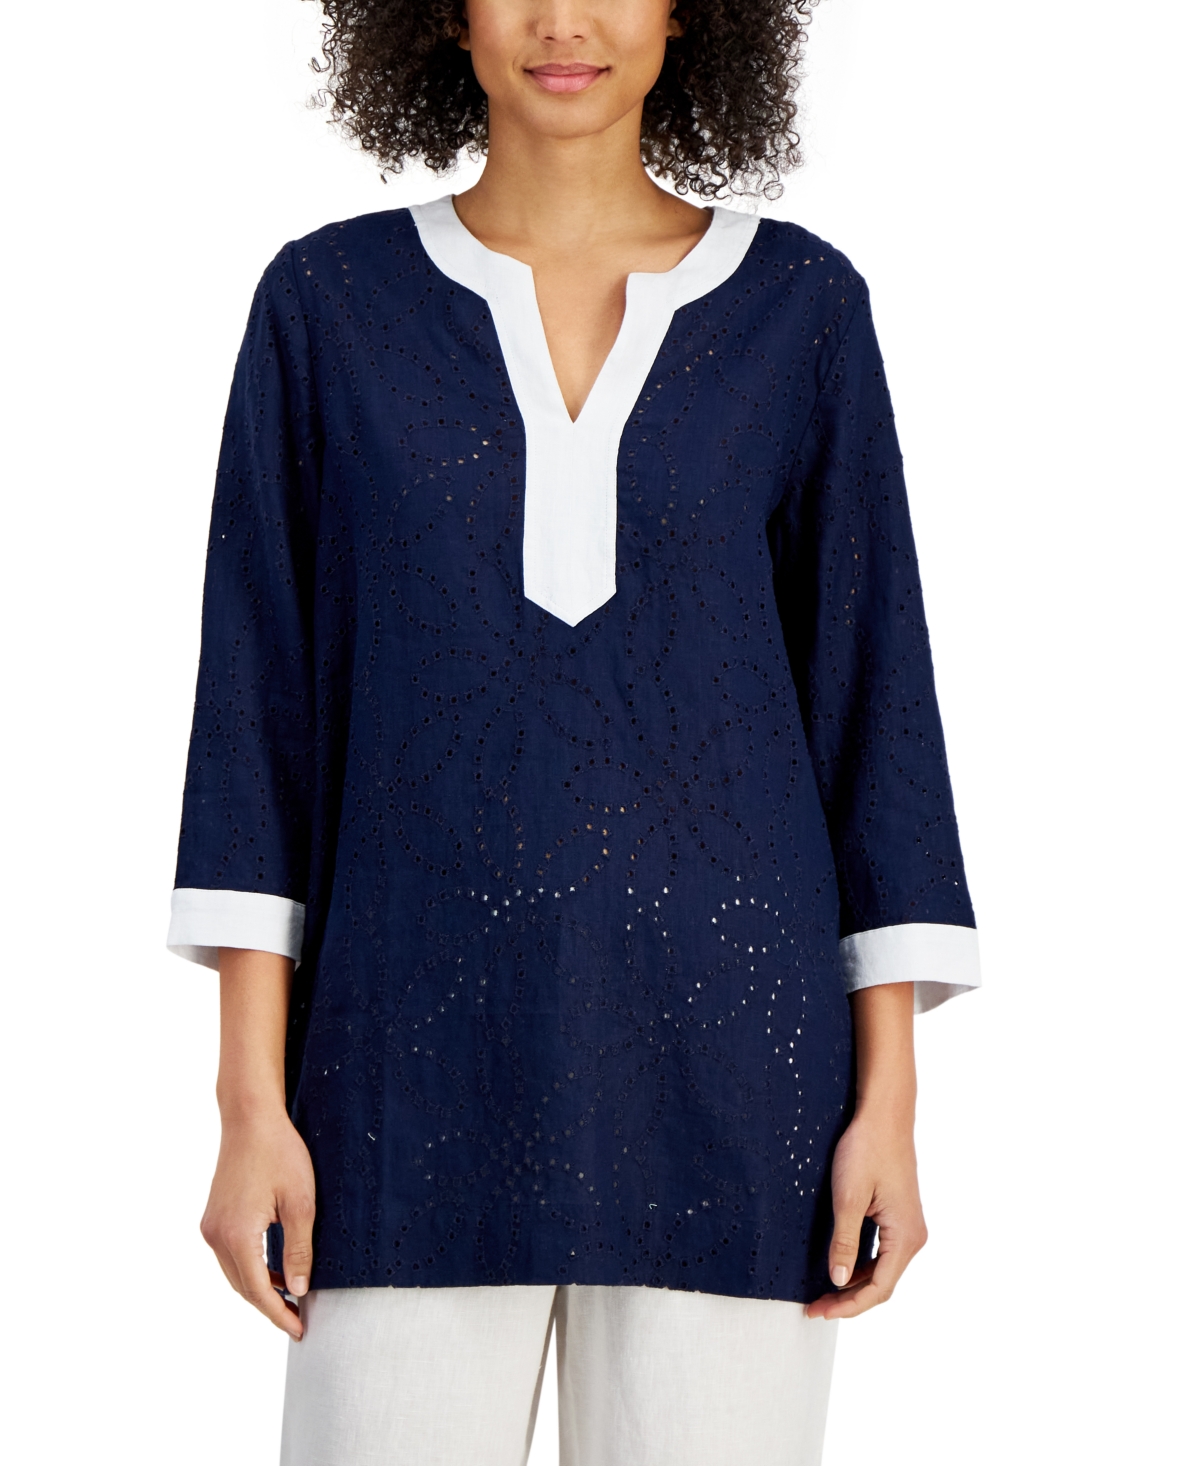 Women's 100% Linen Eyelet Contrast-Trim Tunic, Created for Macy's - Intrepid Blue